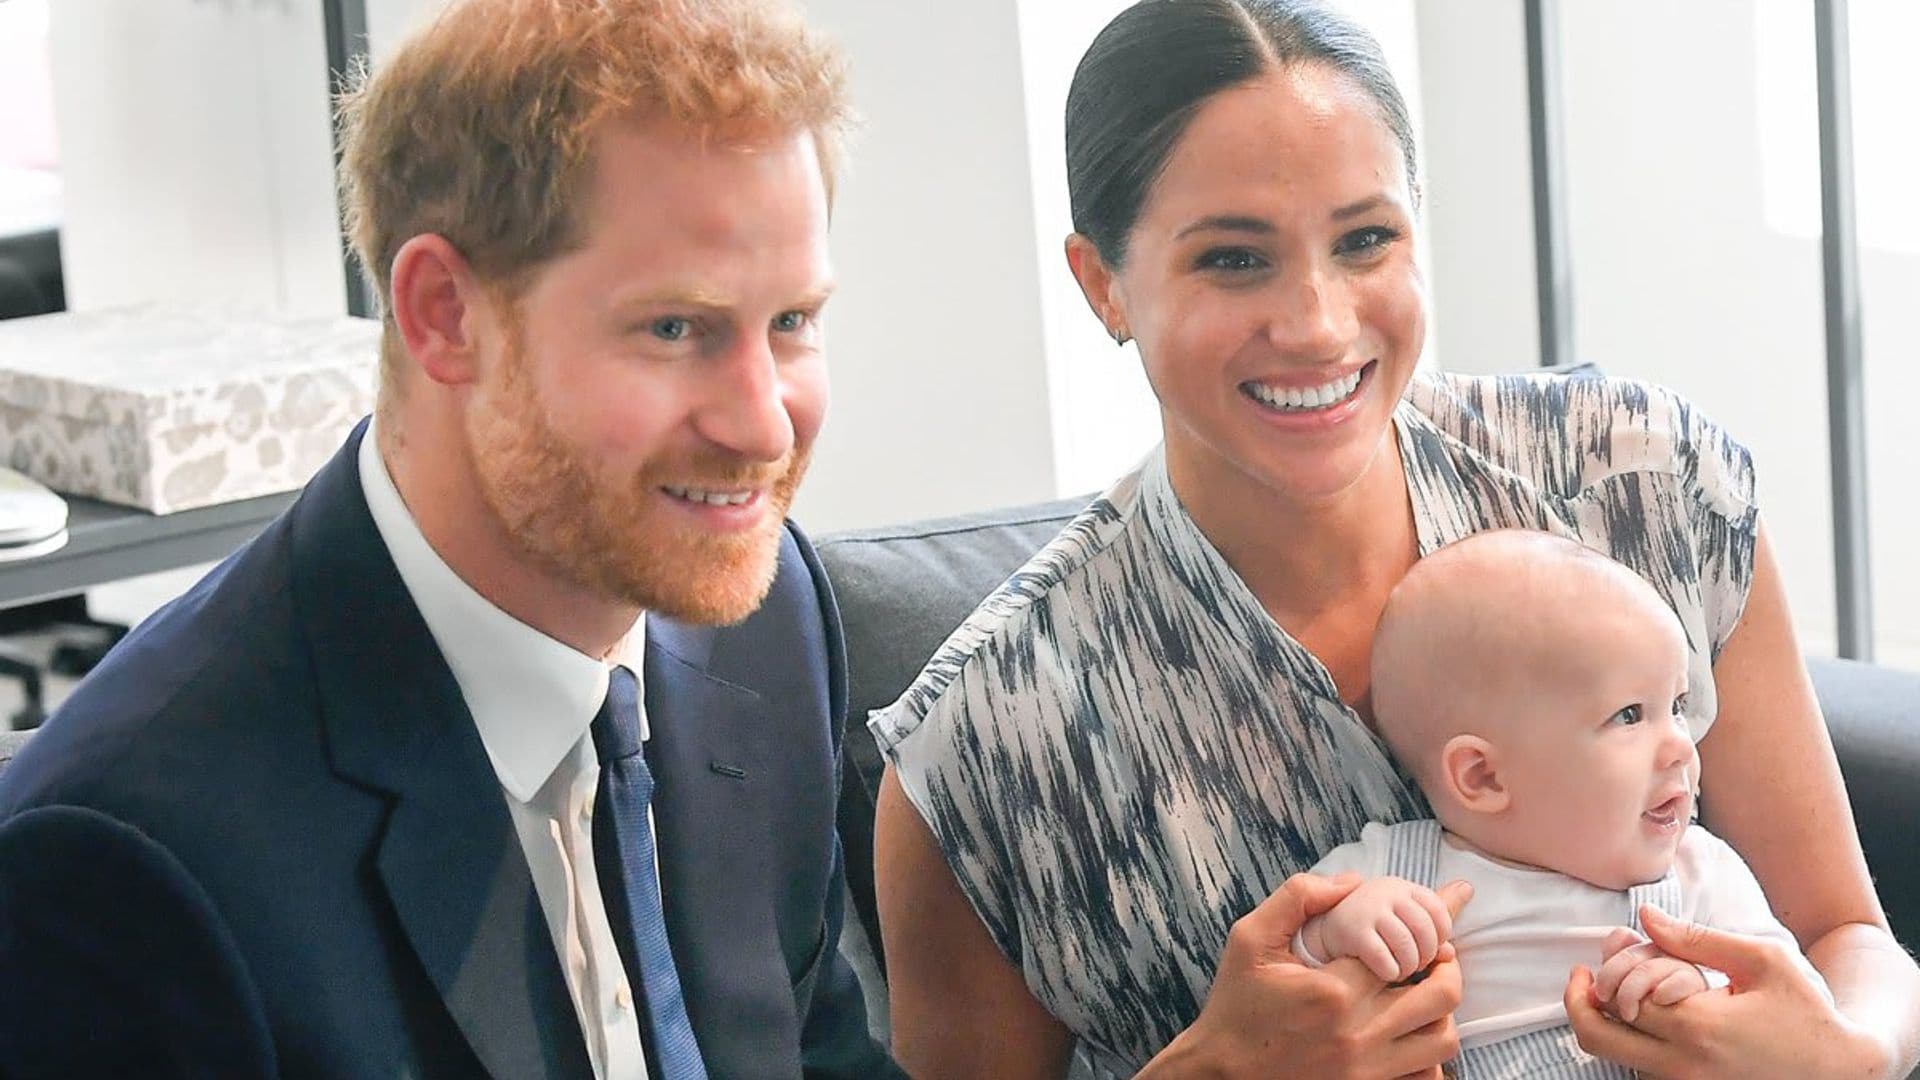 Meghan Markle’s book appears to feature illustration of Prince Harry and son Archie